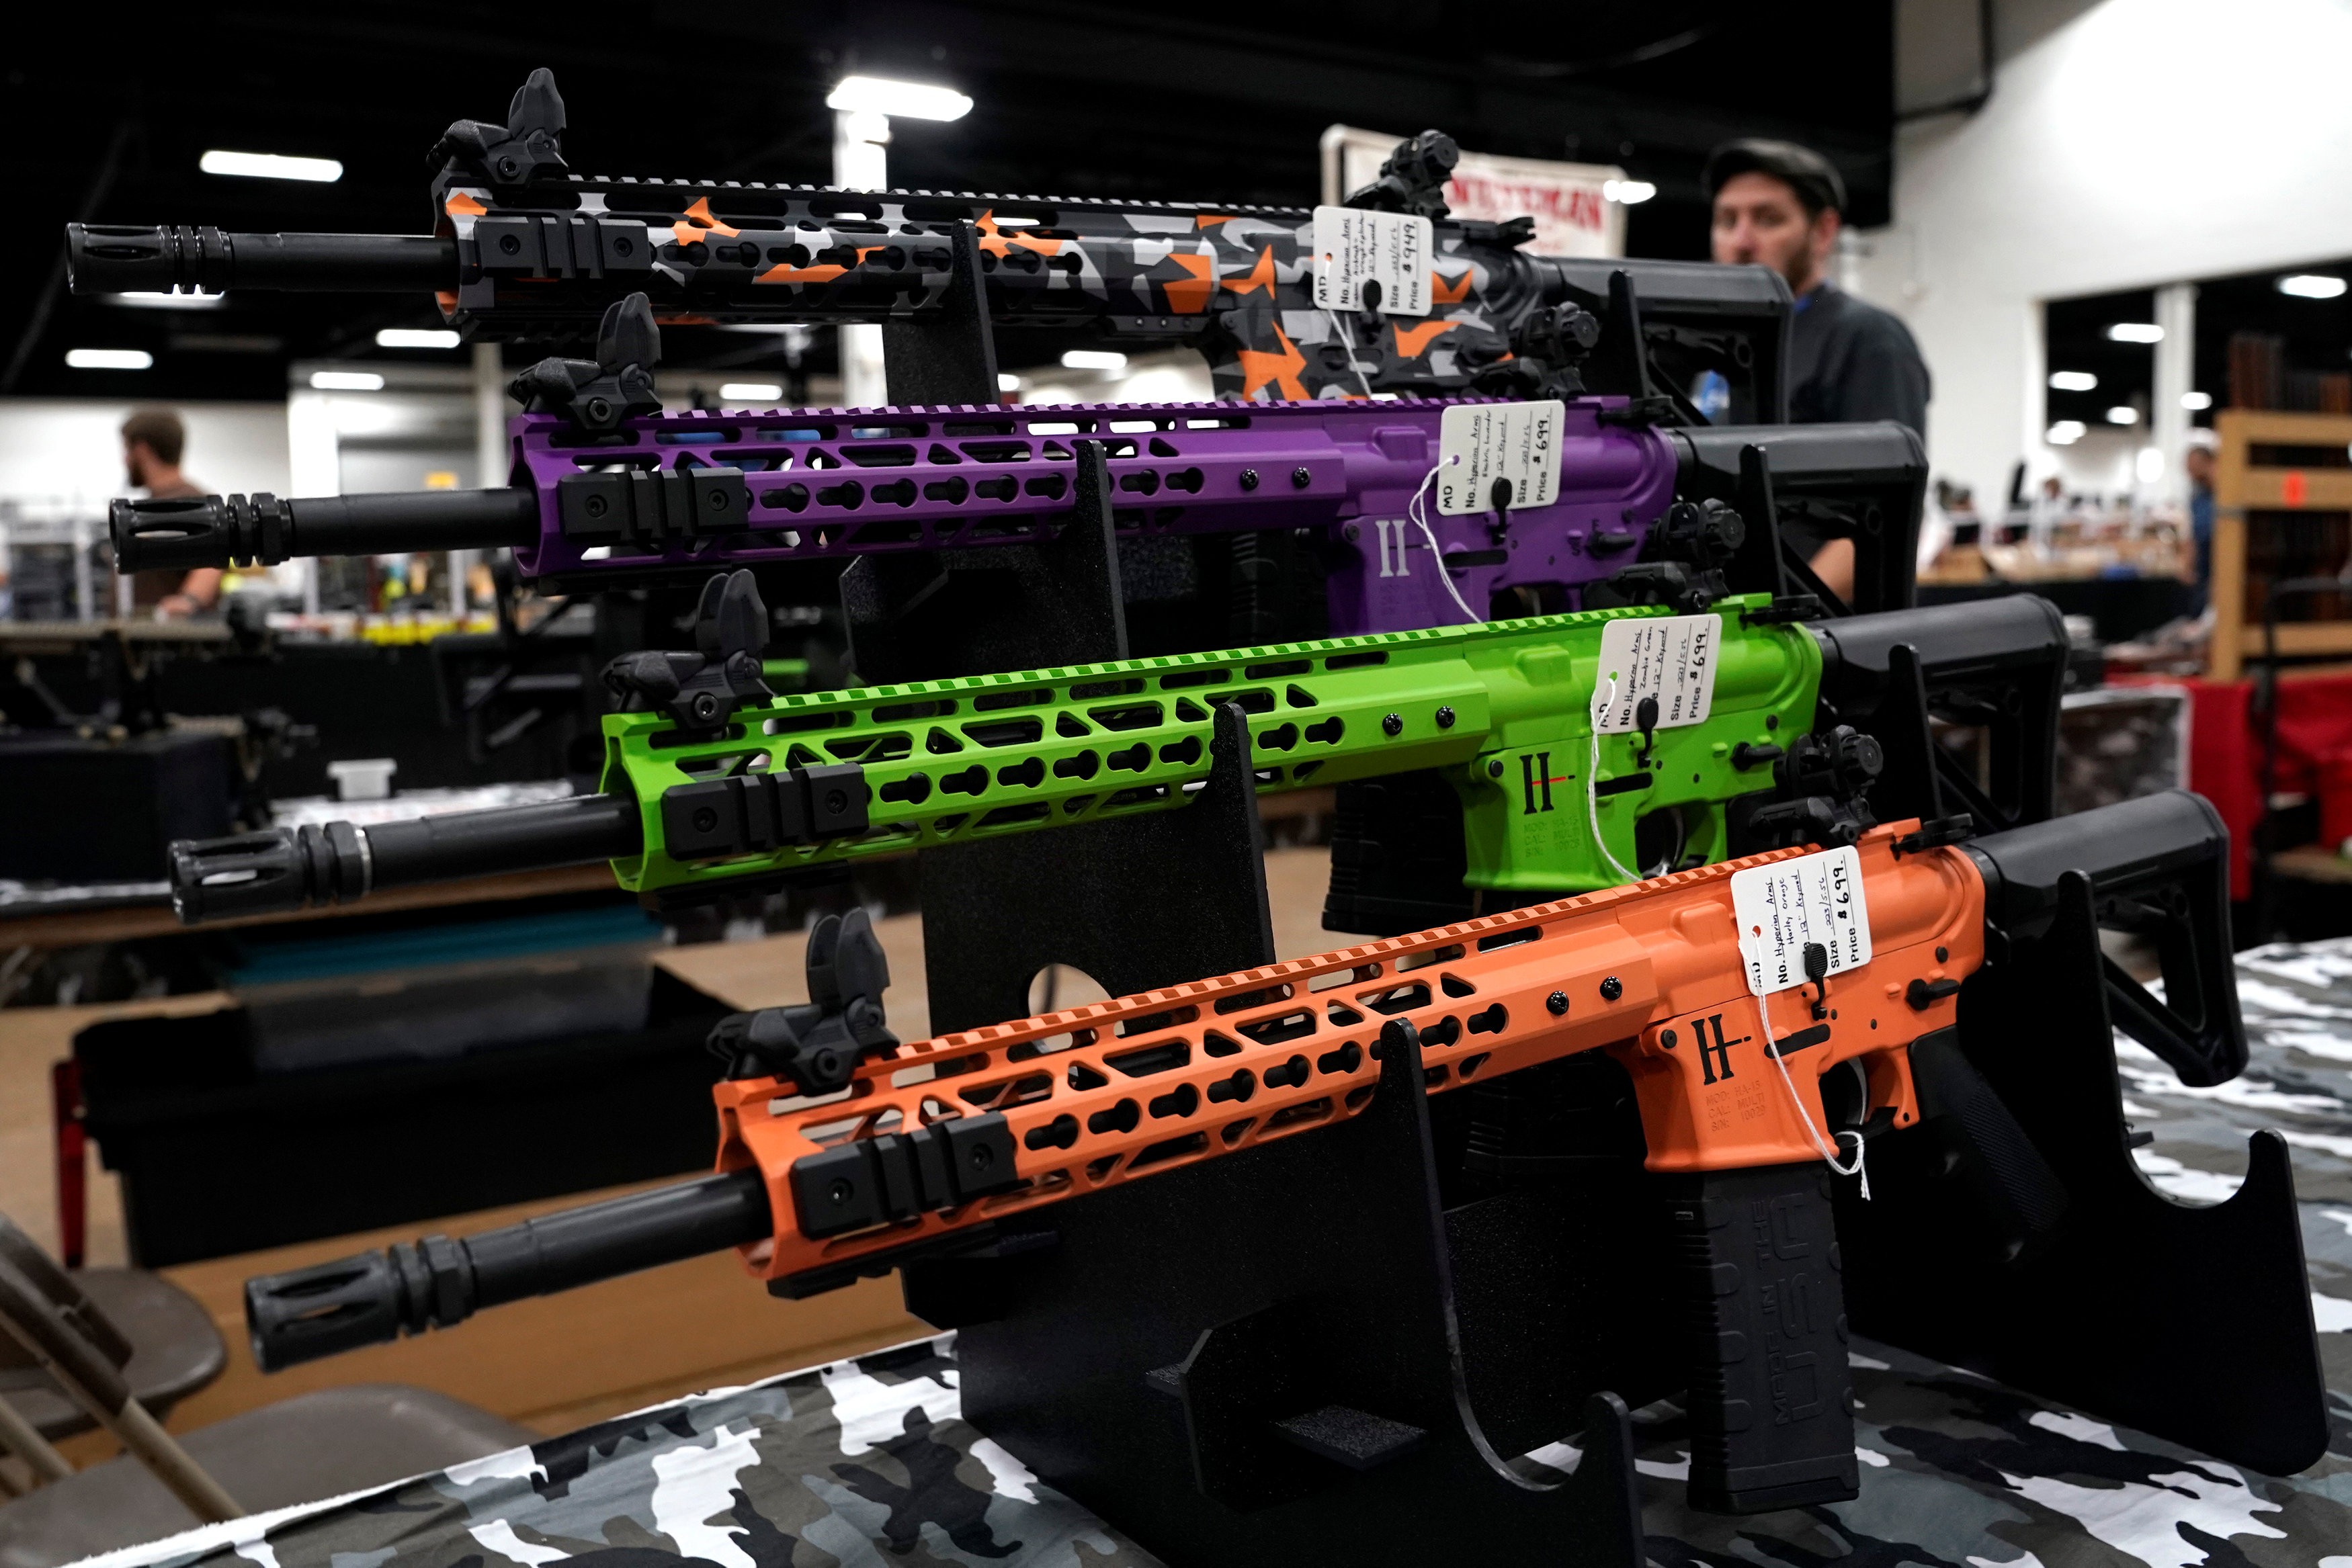 AR-15 rifles with colourful hand guards are displayed for sale at the Guntoberfest gun show in Oaks, Pennsylvania, on Friday. Photo: Reuters